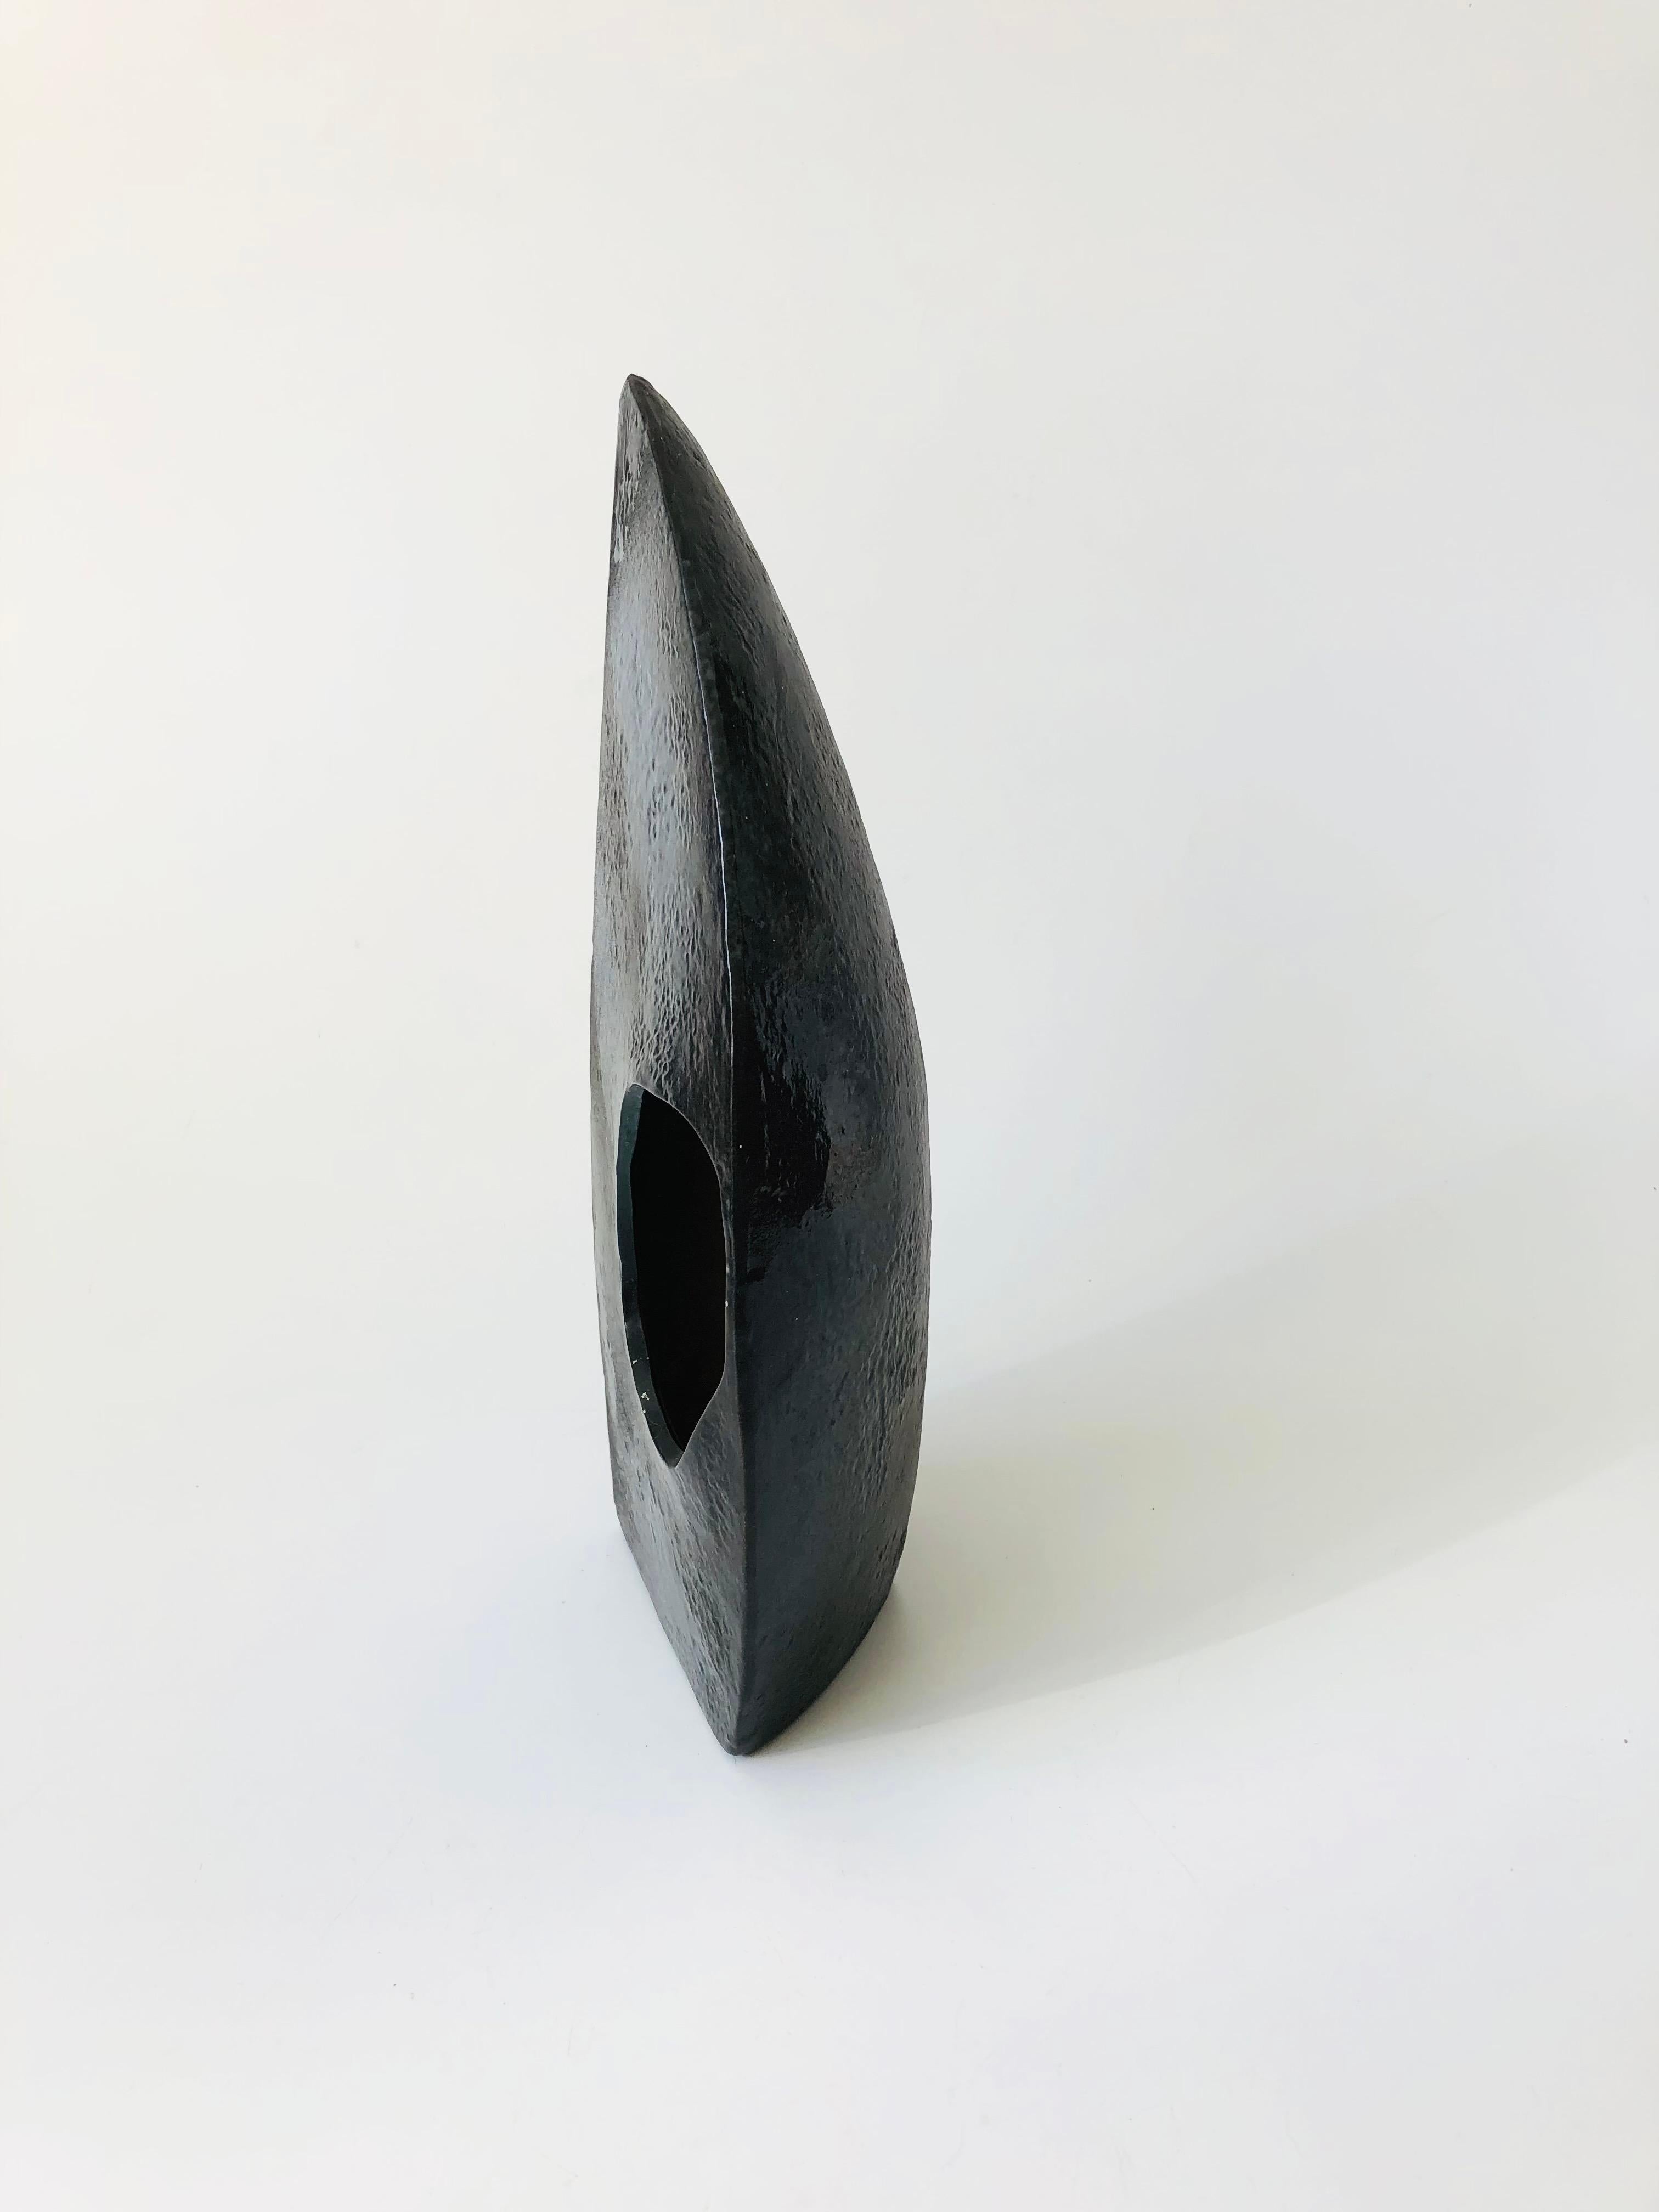 A vintage sculptural pottery ikebana vase. Dramatic dark glaze with wonderful variation and light texture. In a crescent moon shape with an offset circular opening. Can be displayed upright or flat on a table top.

